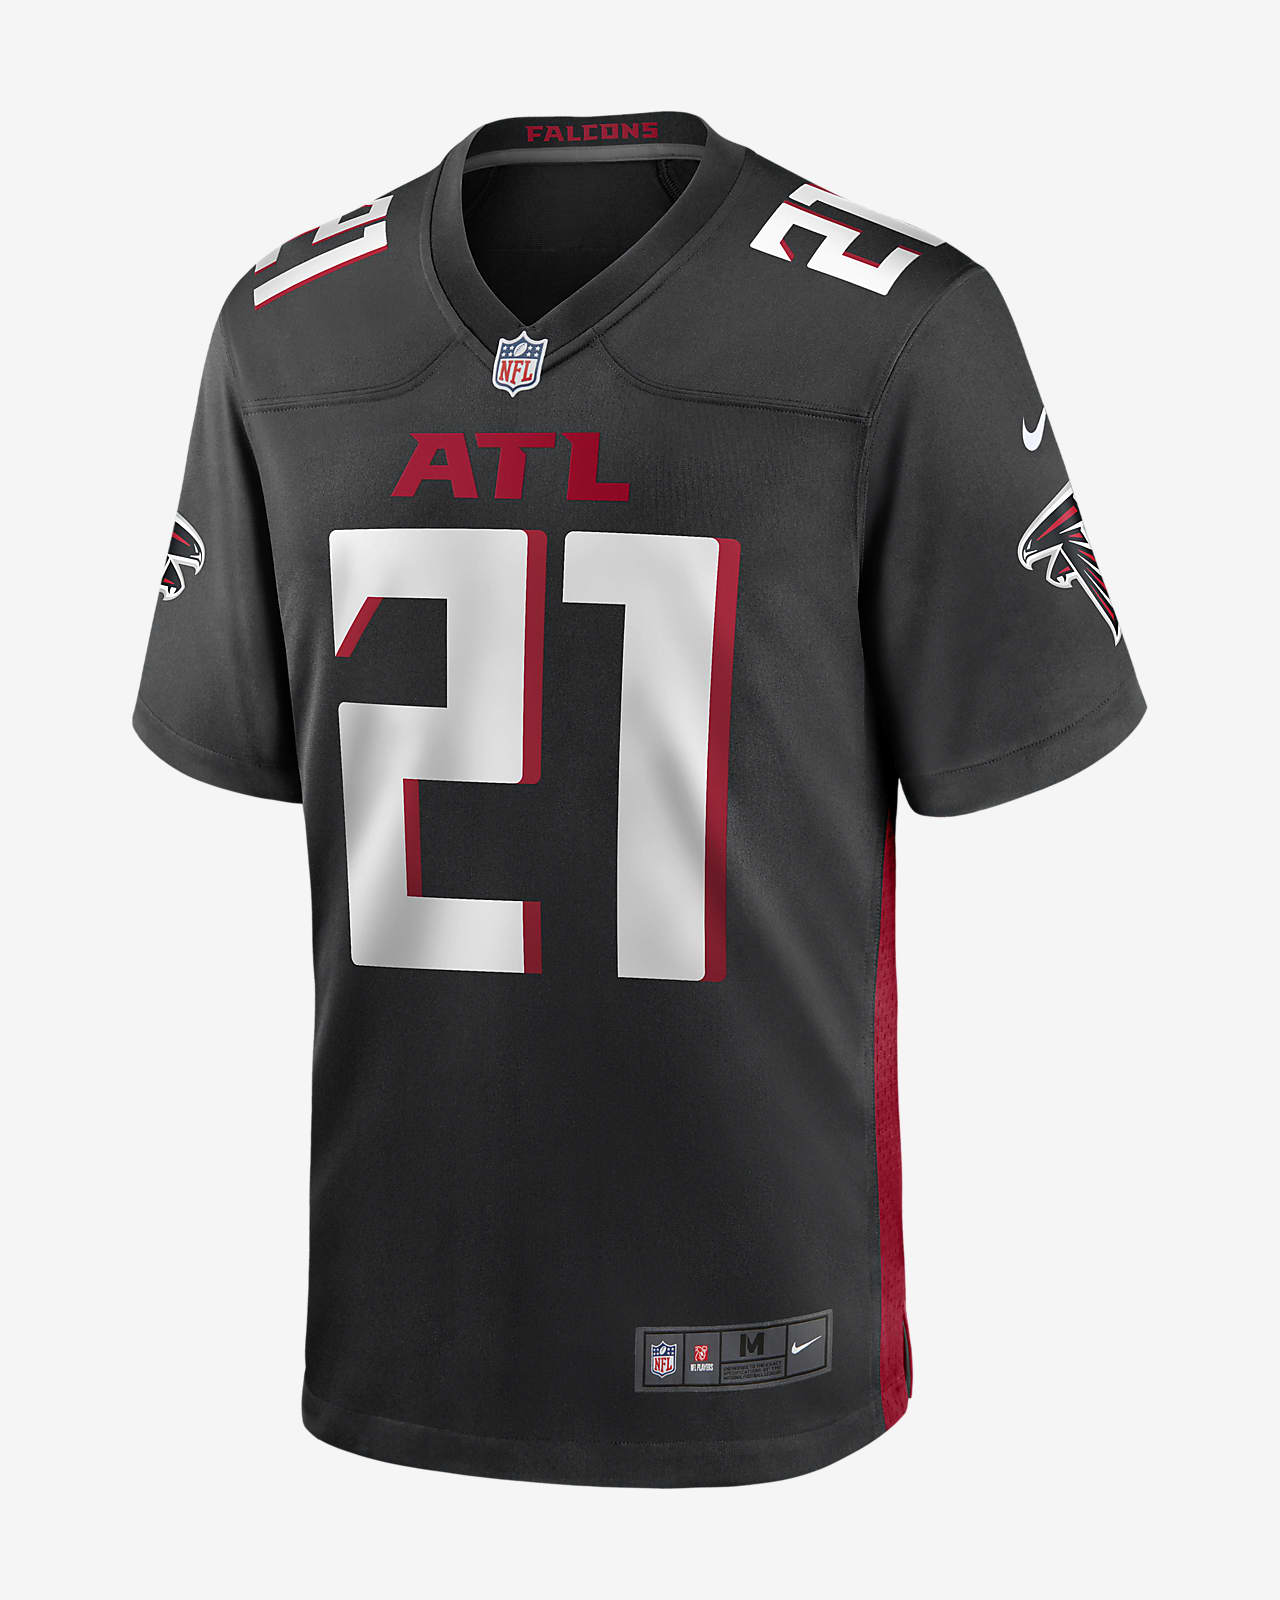 where can i buy a falcons jersey